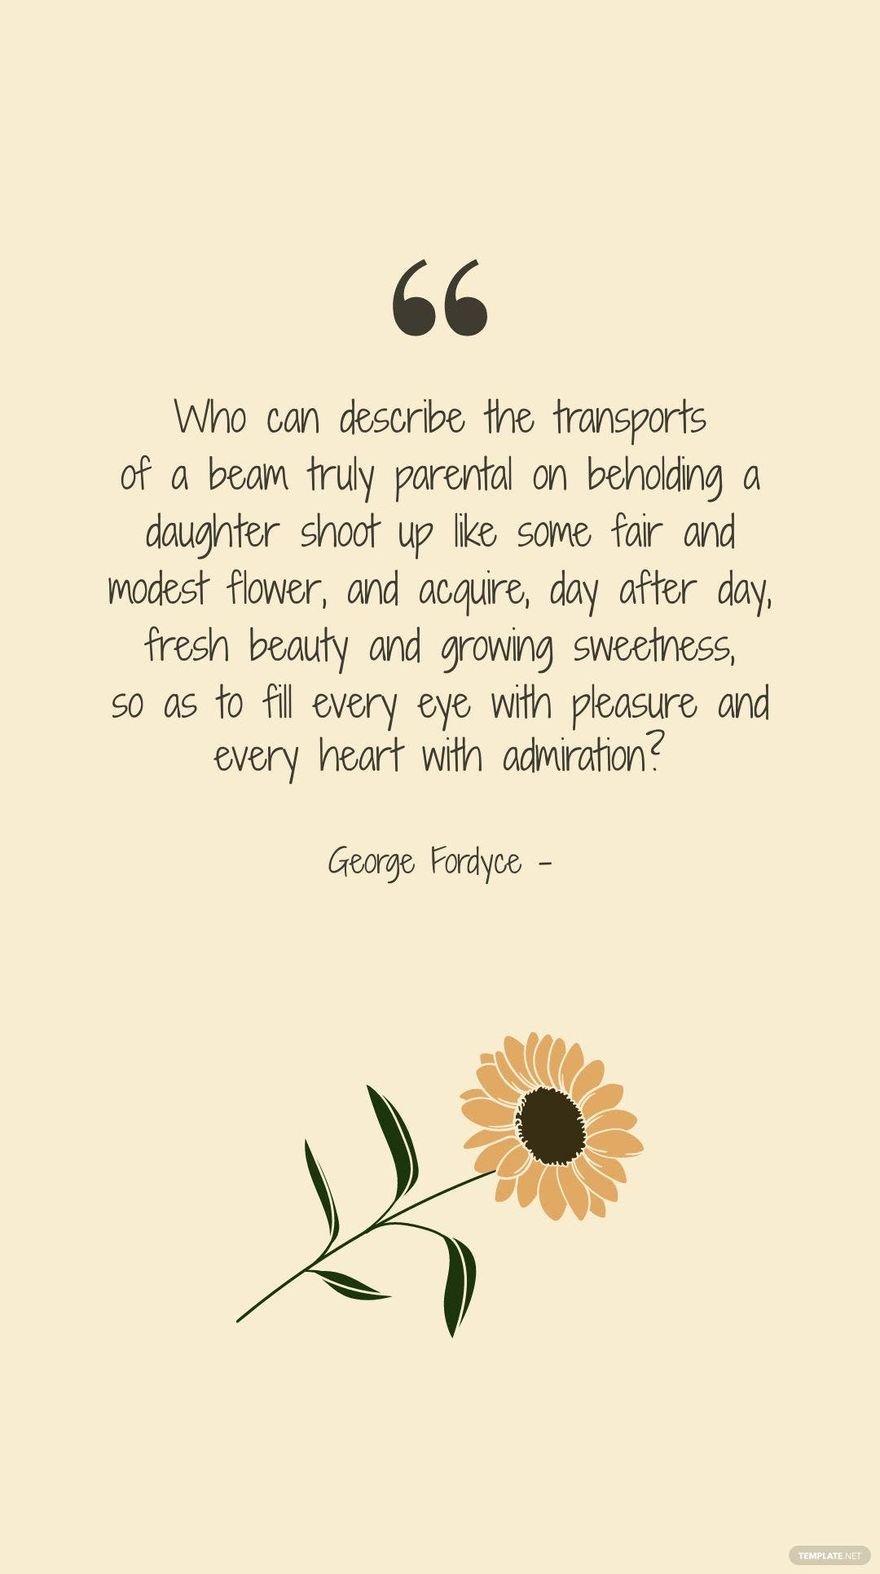 GEORGE FORDYCE - Who can describe the transports of a beam truly parental on beholding a daughter shoot up like some fair and modest flower, and acquire, day after day, fresh beauty and growing sweetn